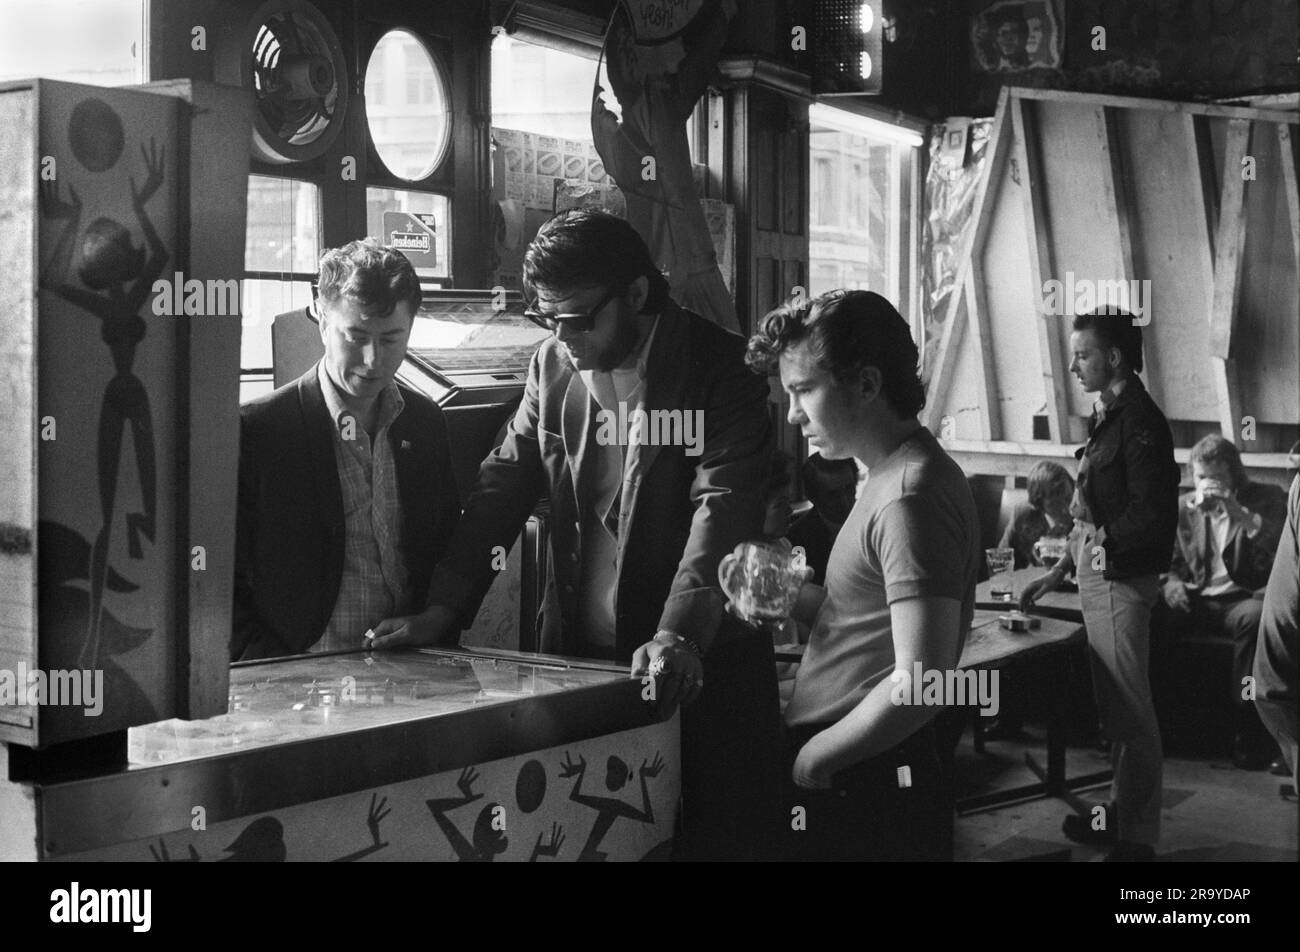 Teddy Boys 1970s UK. Playing a pinball machine at The Black Raven in Bishopgate Street, 'Sunglasses Ron Staples', styled himself the 'King of the Teds' the 'Edwardian Teddy Boy'. (Sunglasses Ron Staples, died in 1999.) Moorgate, London, England 1975.  1970s UK HOMER SYKES Stock Photo